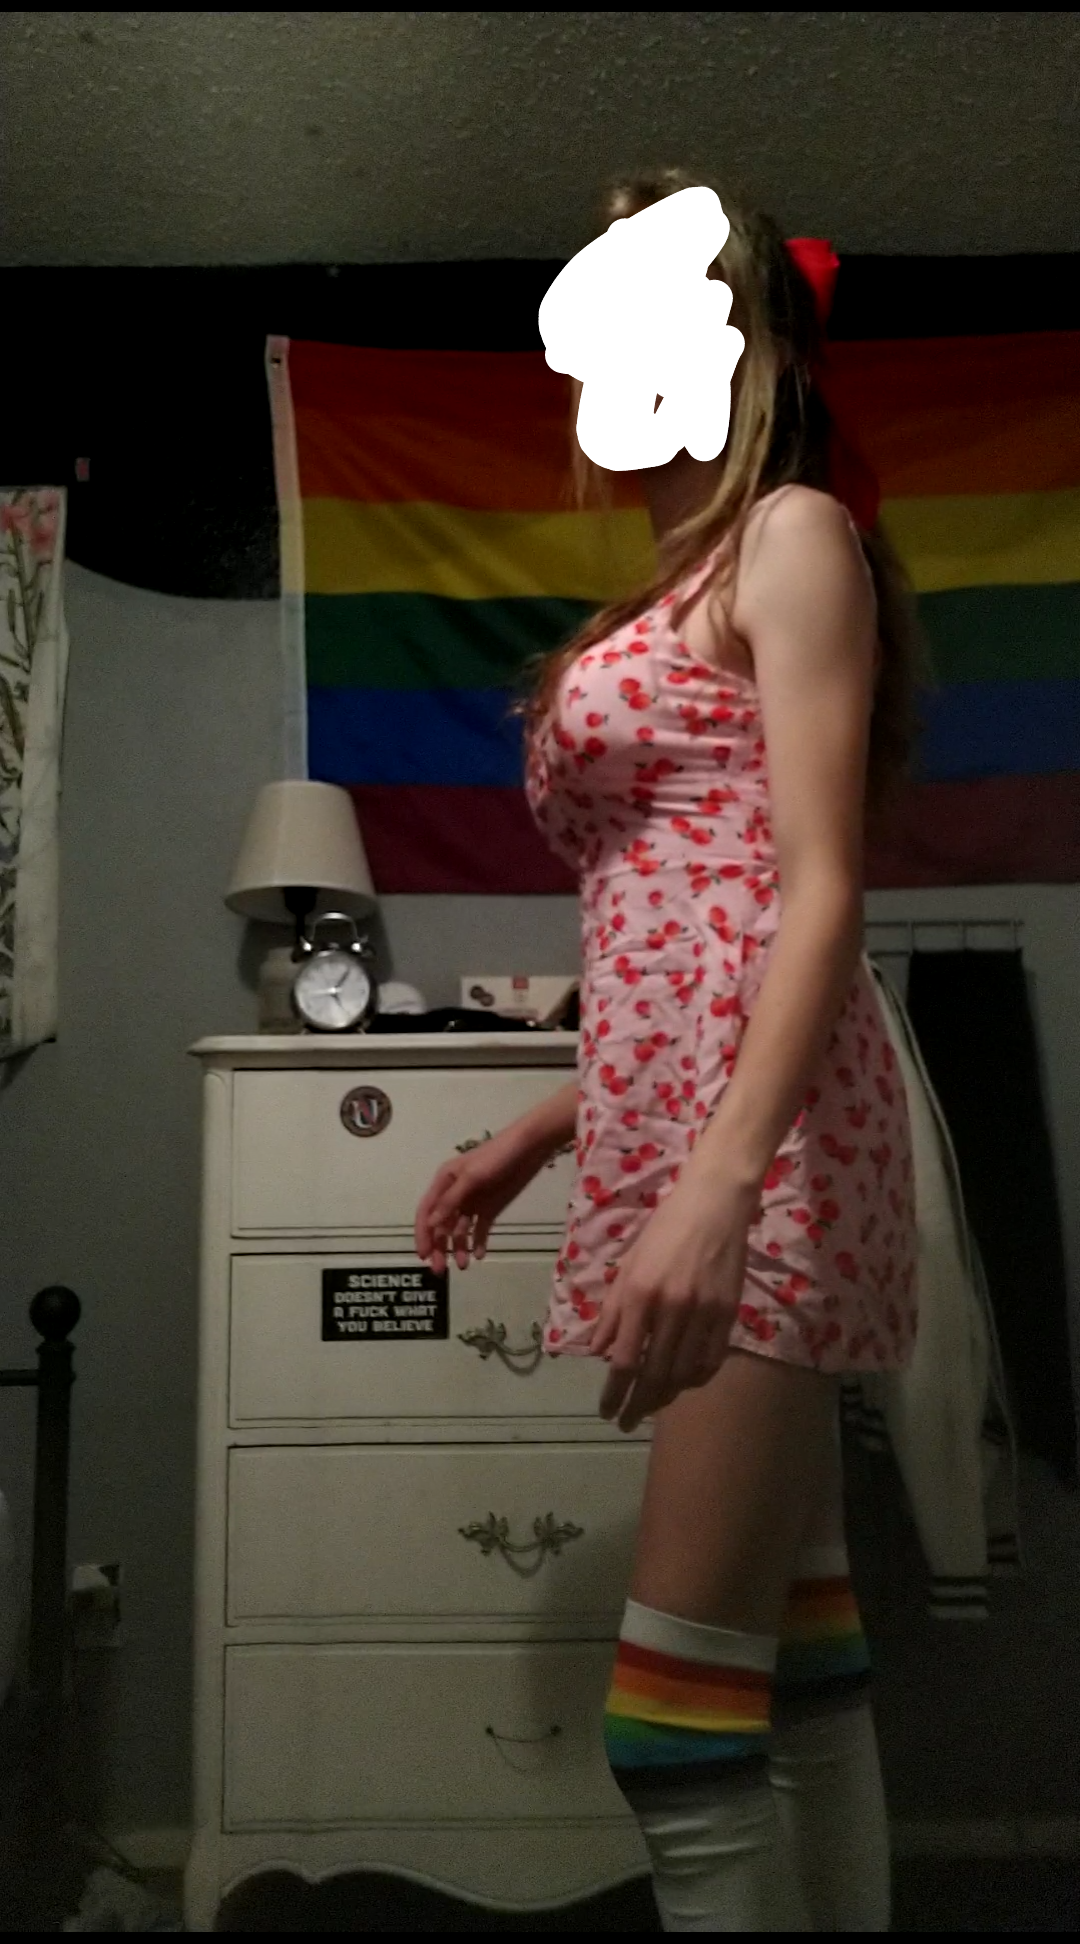 me wearing a pink dress, face blurred